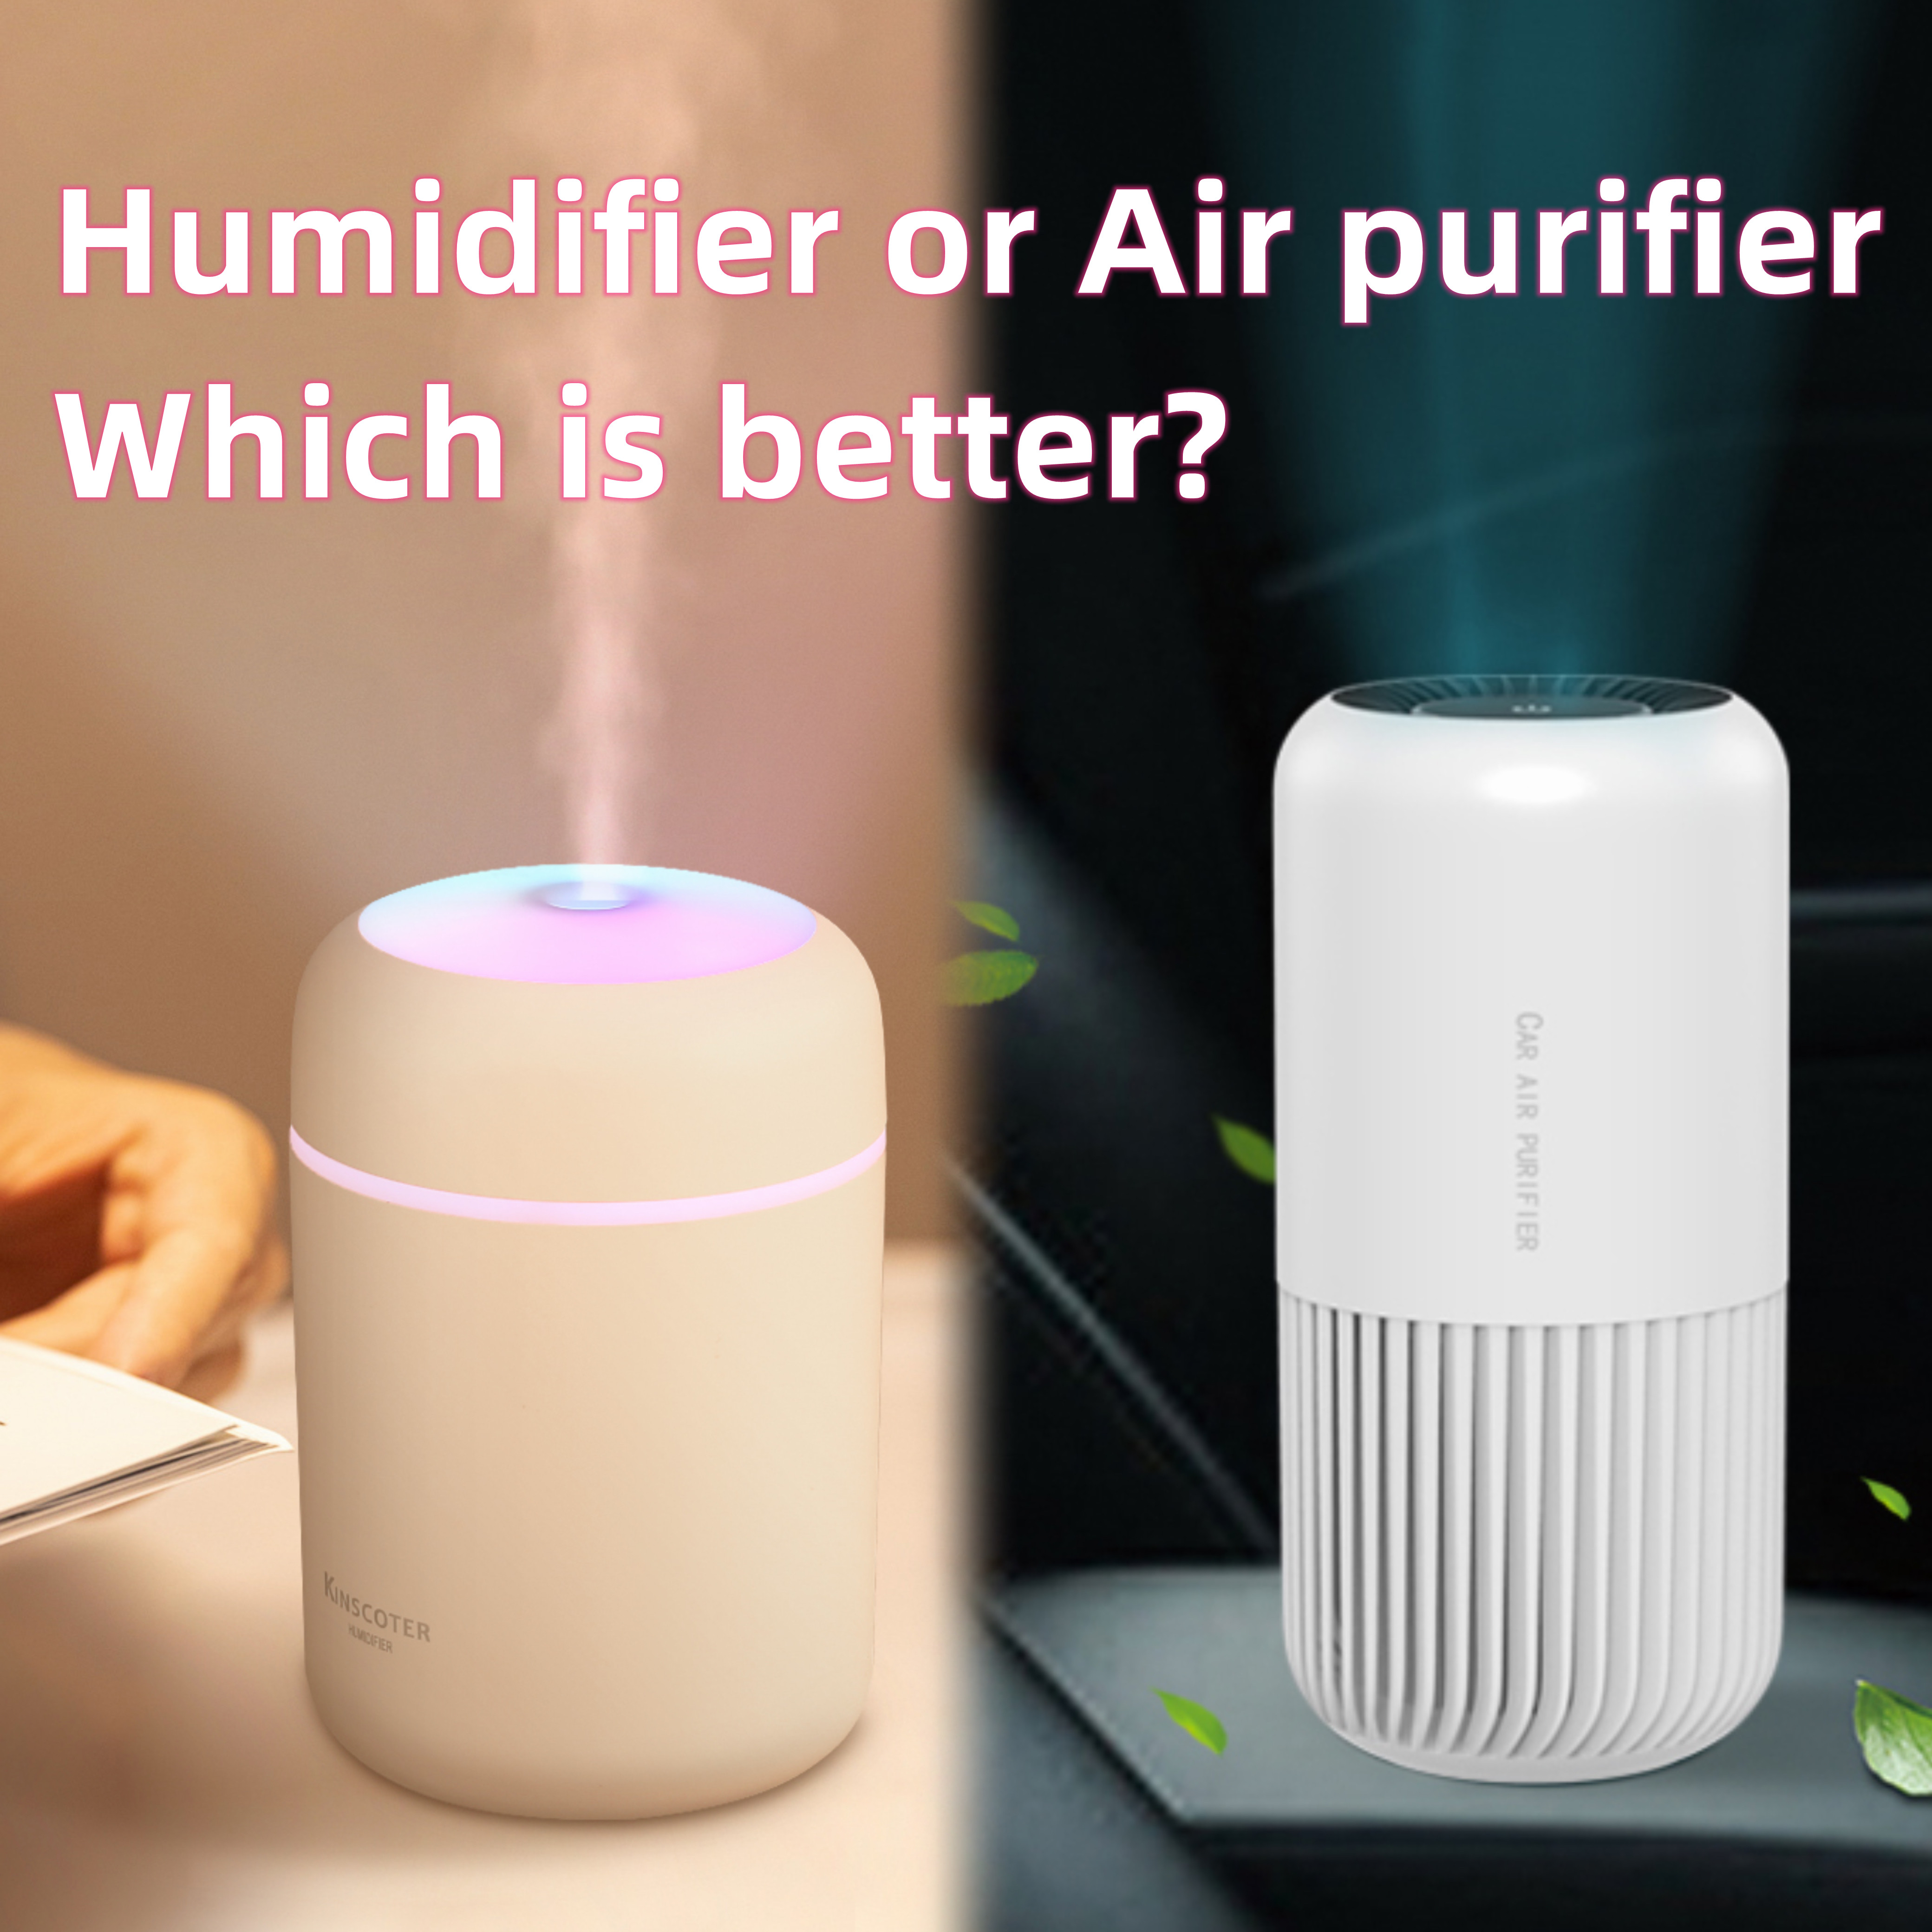 Humidifier or Air purifier, Which is better?